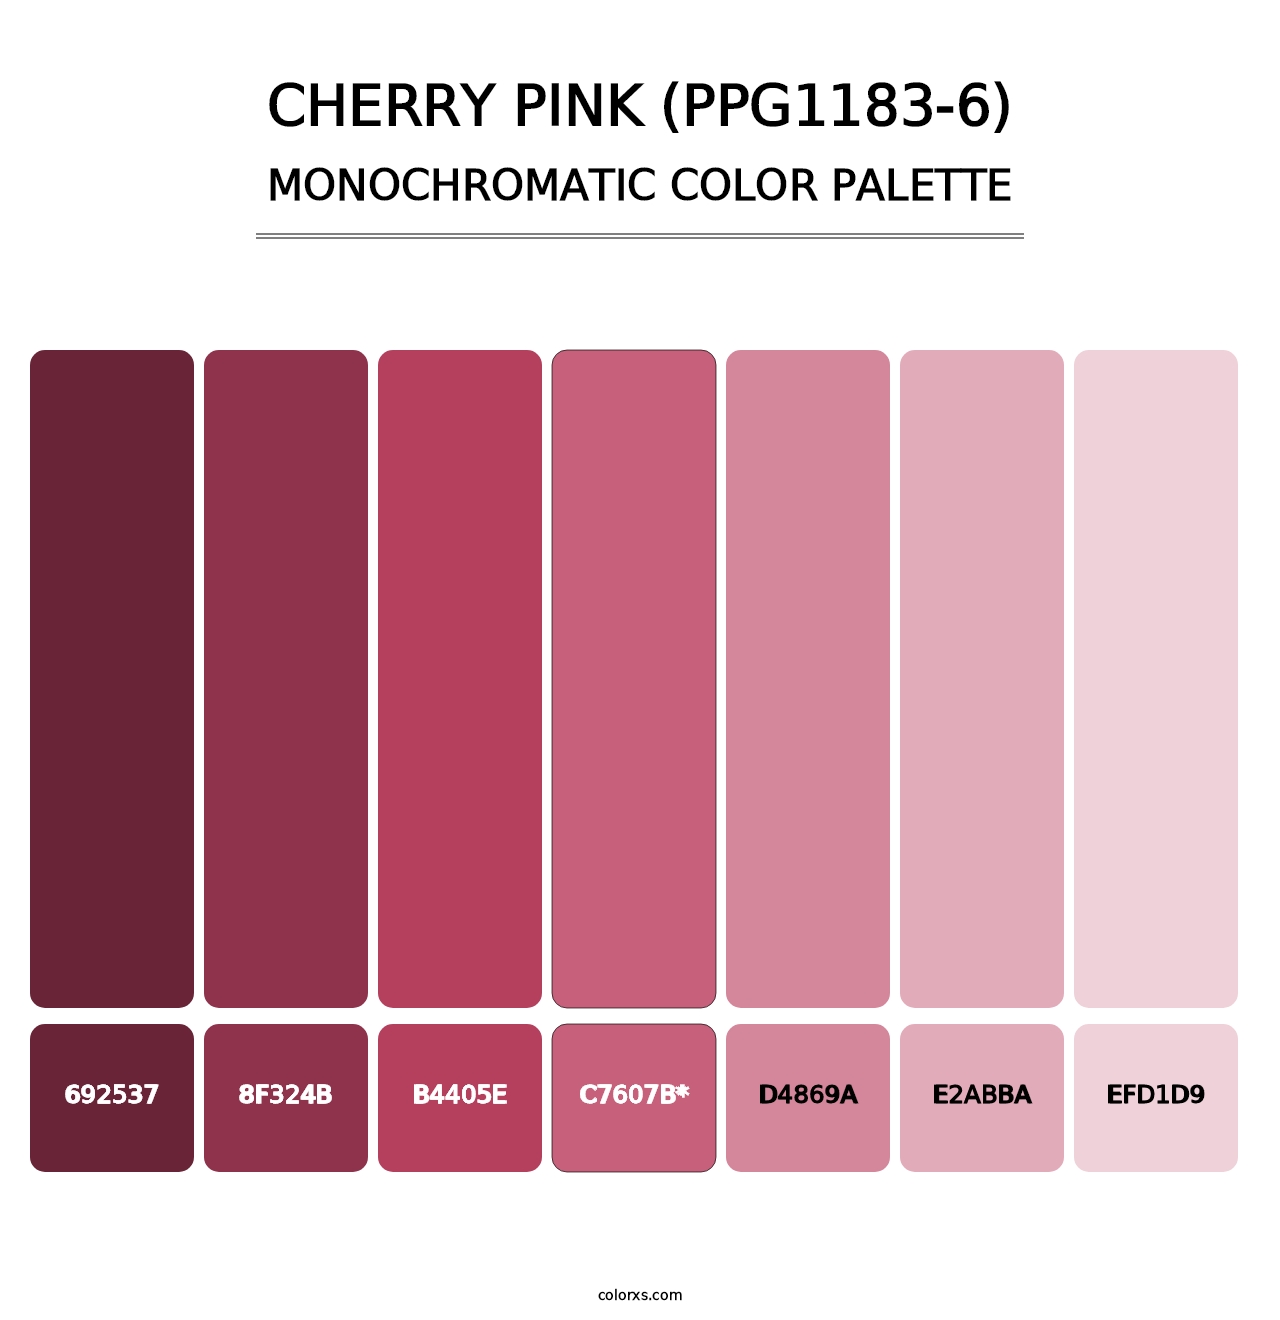 Cherry Pink (PPG1183-6) - Monochromatic Color Palette